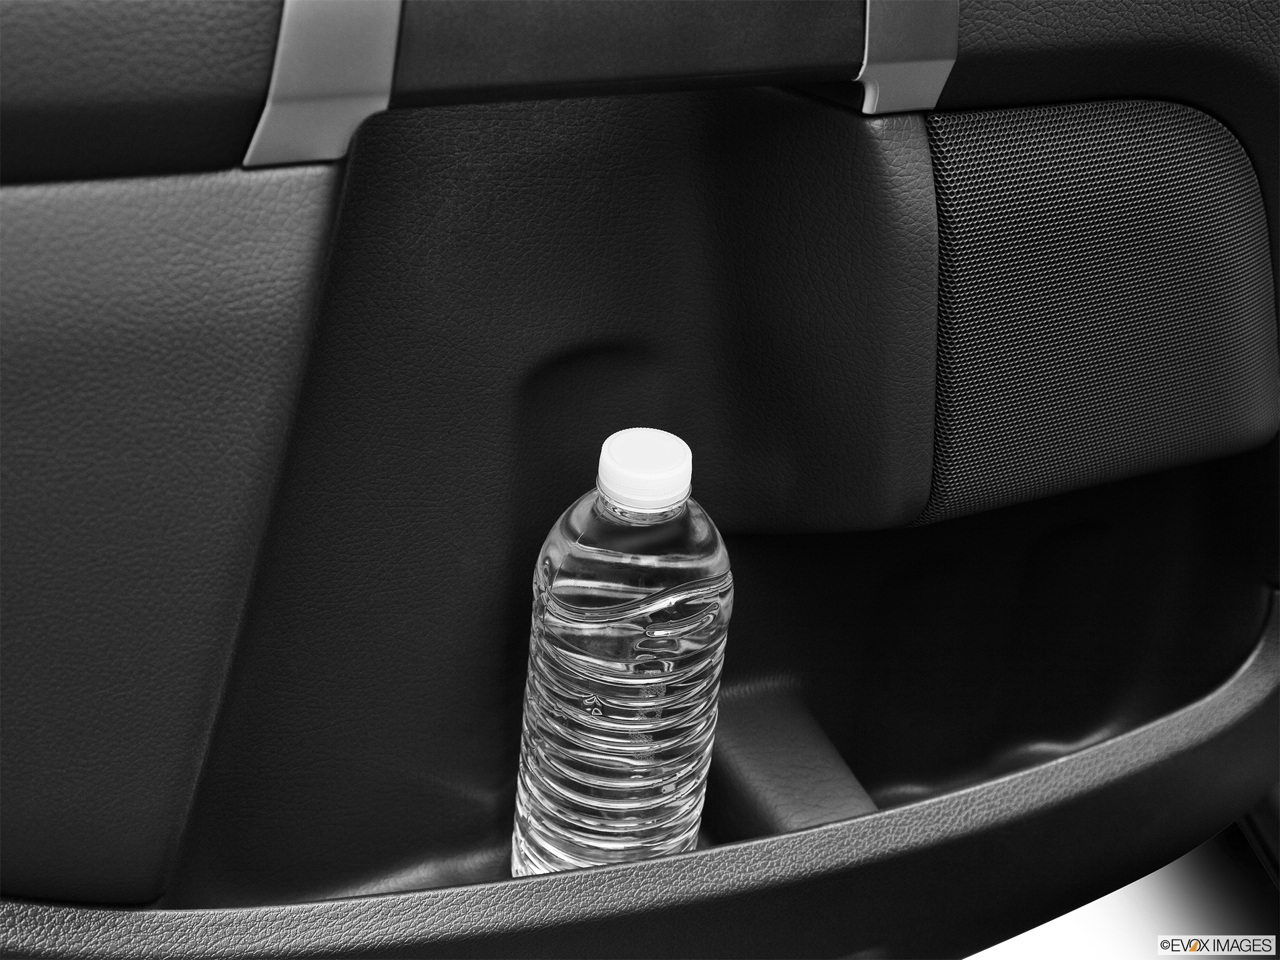 2011 Volvo XC90 3.2 Second row side cup holder with coffee prop, or second row door cup holder with water bottle. 